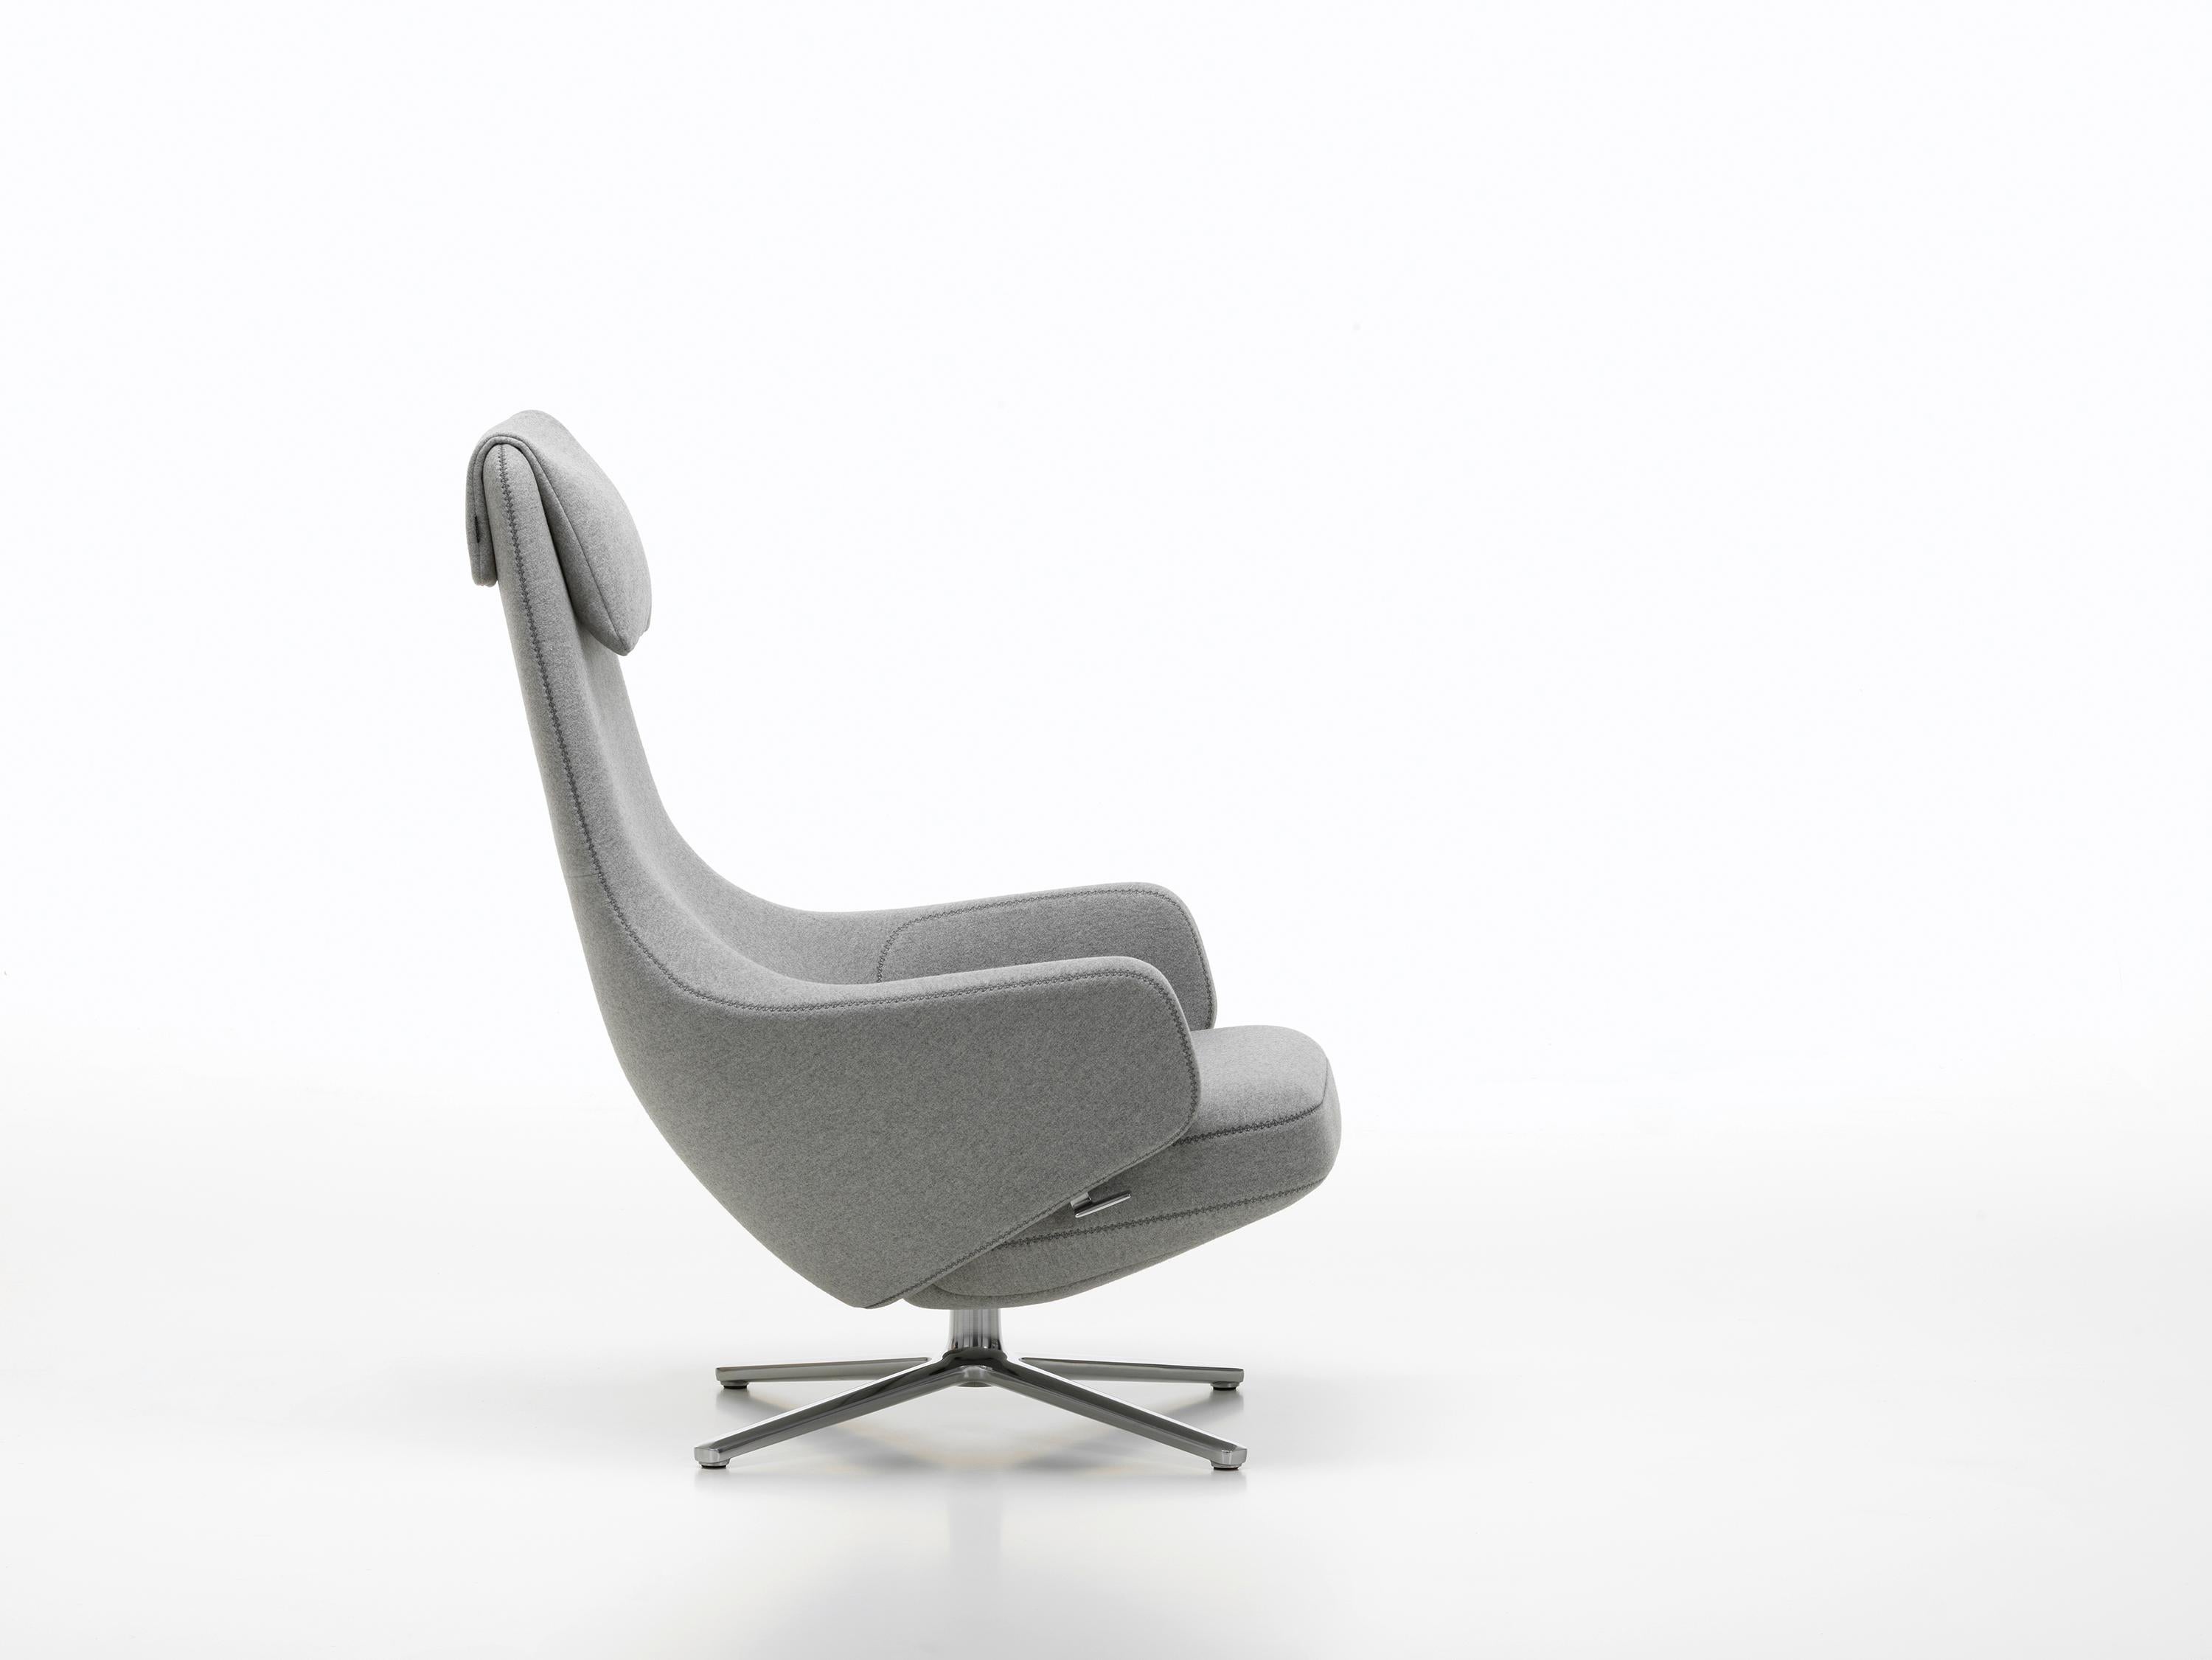 Vitra Repos Lounge Chair in Pebble Grey Cosy by Antonio Citterio For Sale 4